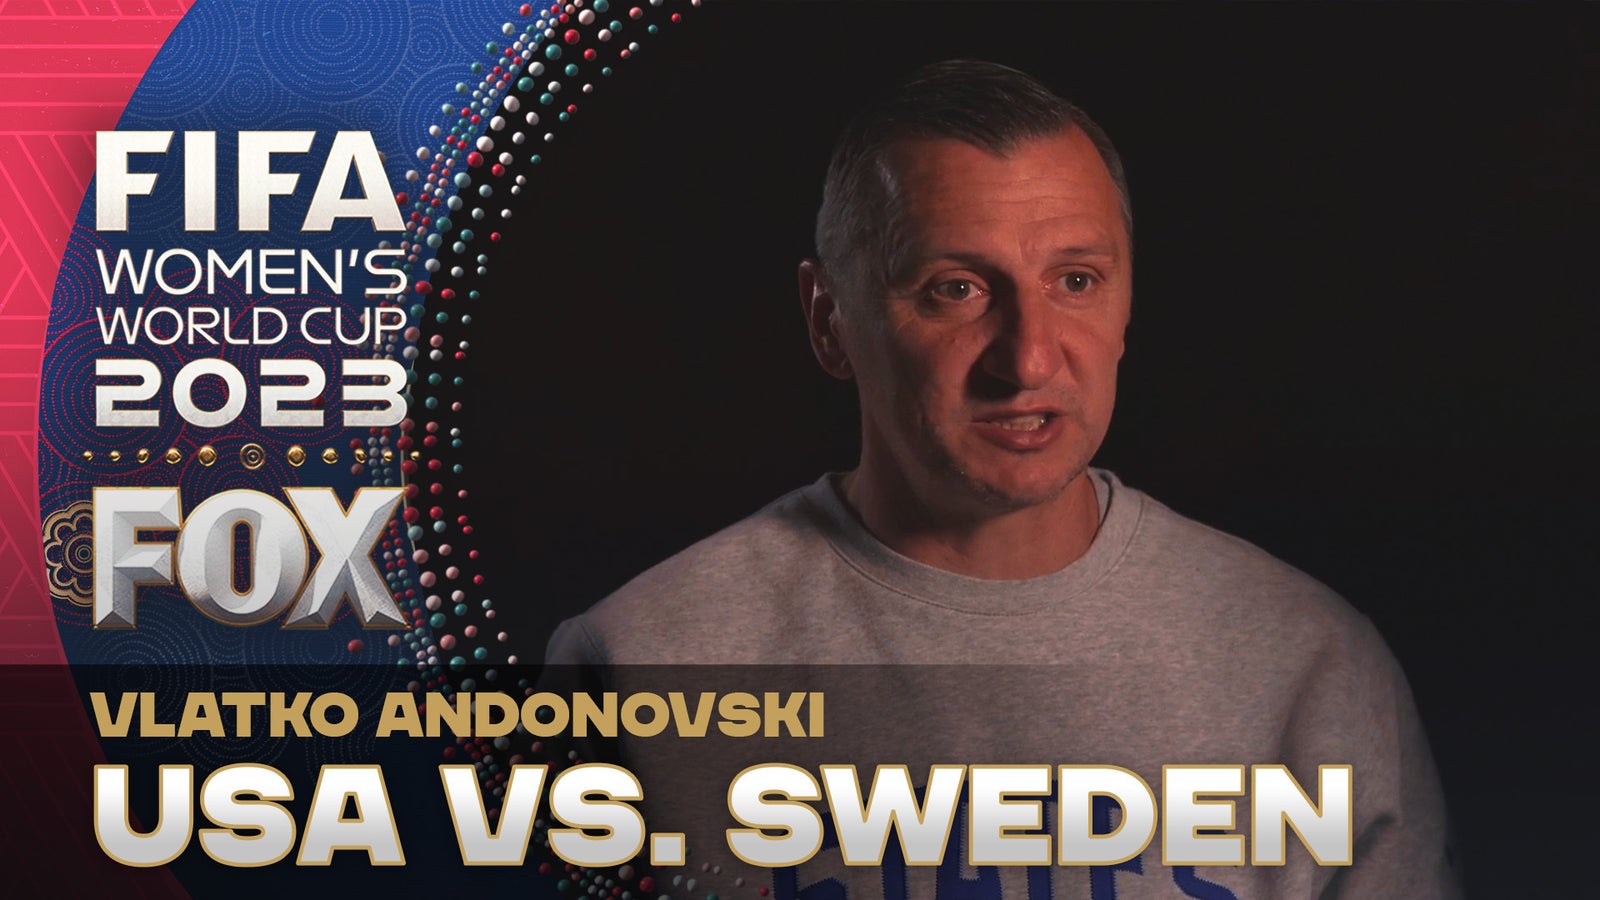 "World Cup Tonight" crew reacts to Vlatko Andonovski's comments